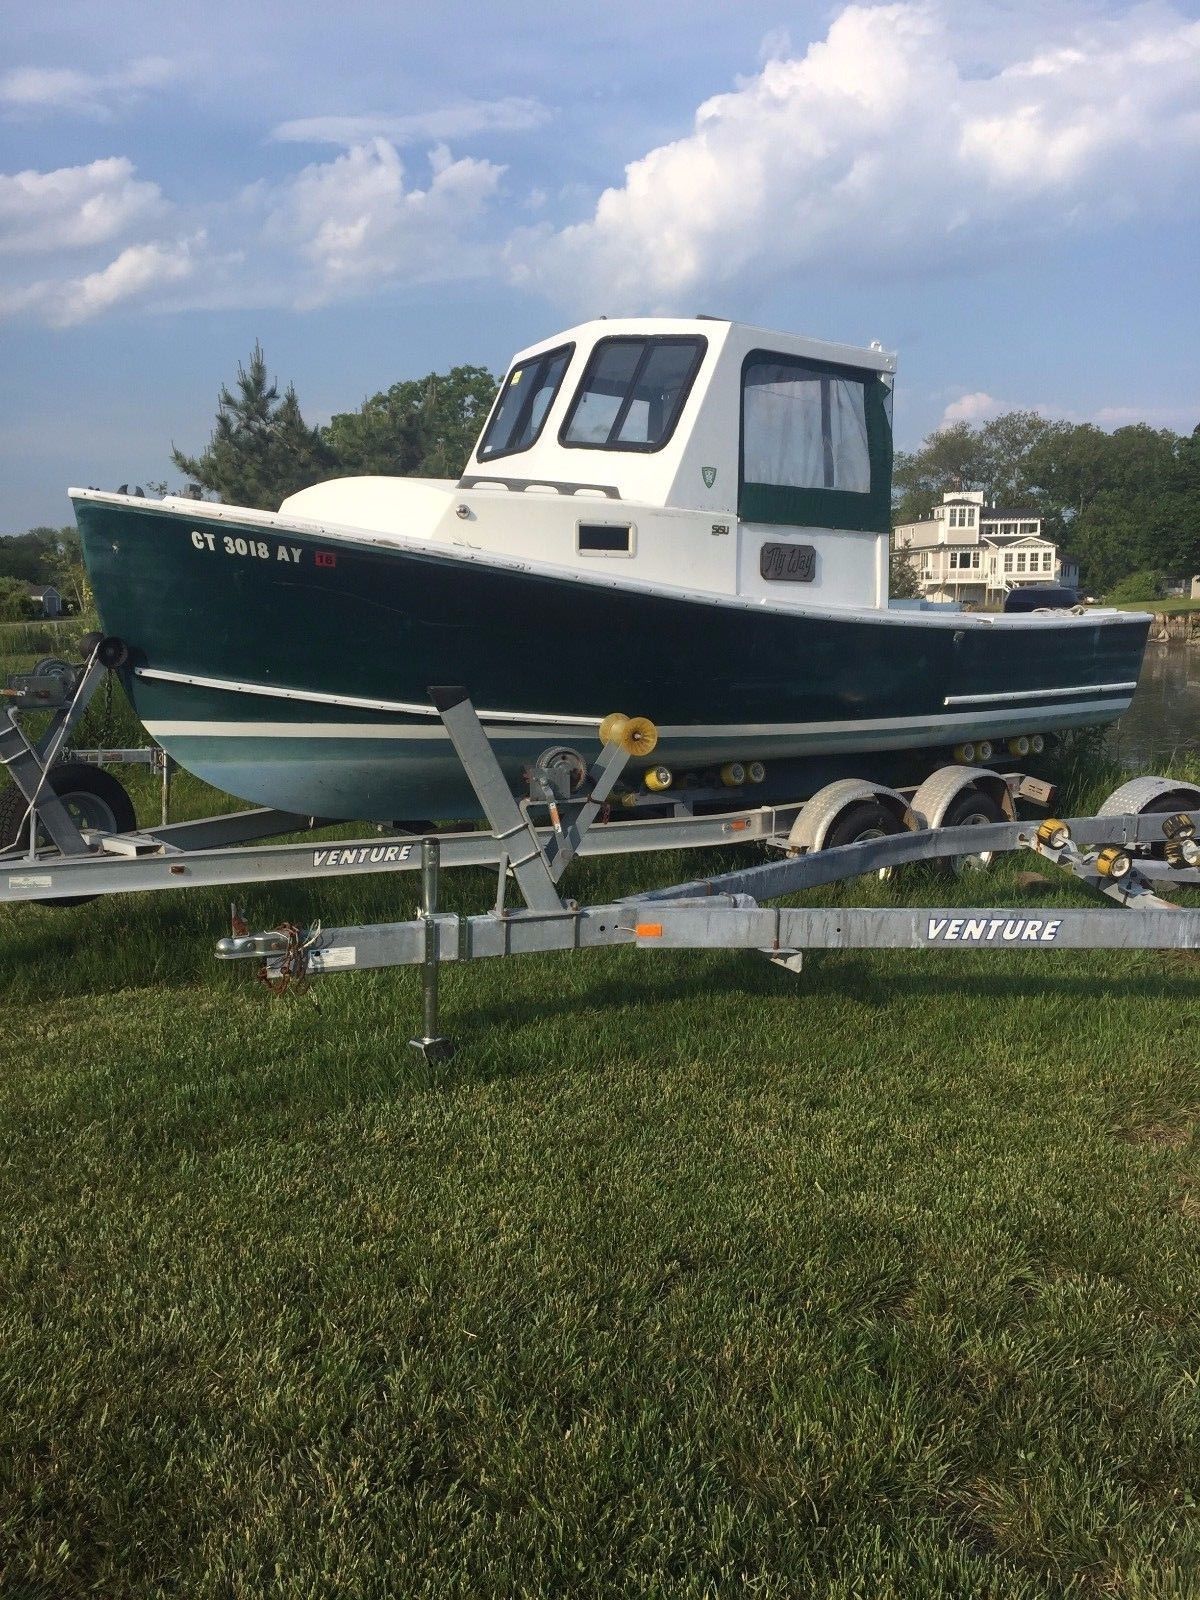 Sisu 22 1980 for sale for $6,500 - Boats-from-USA.com